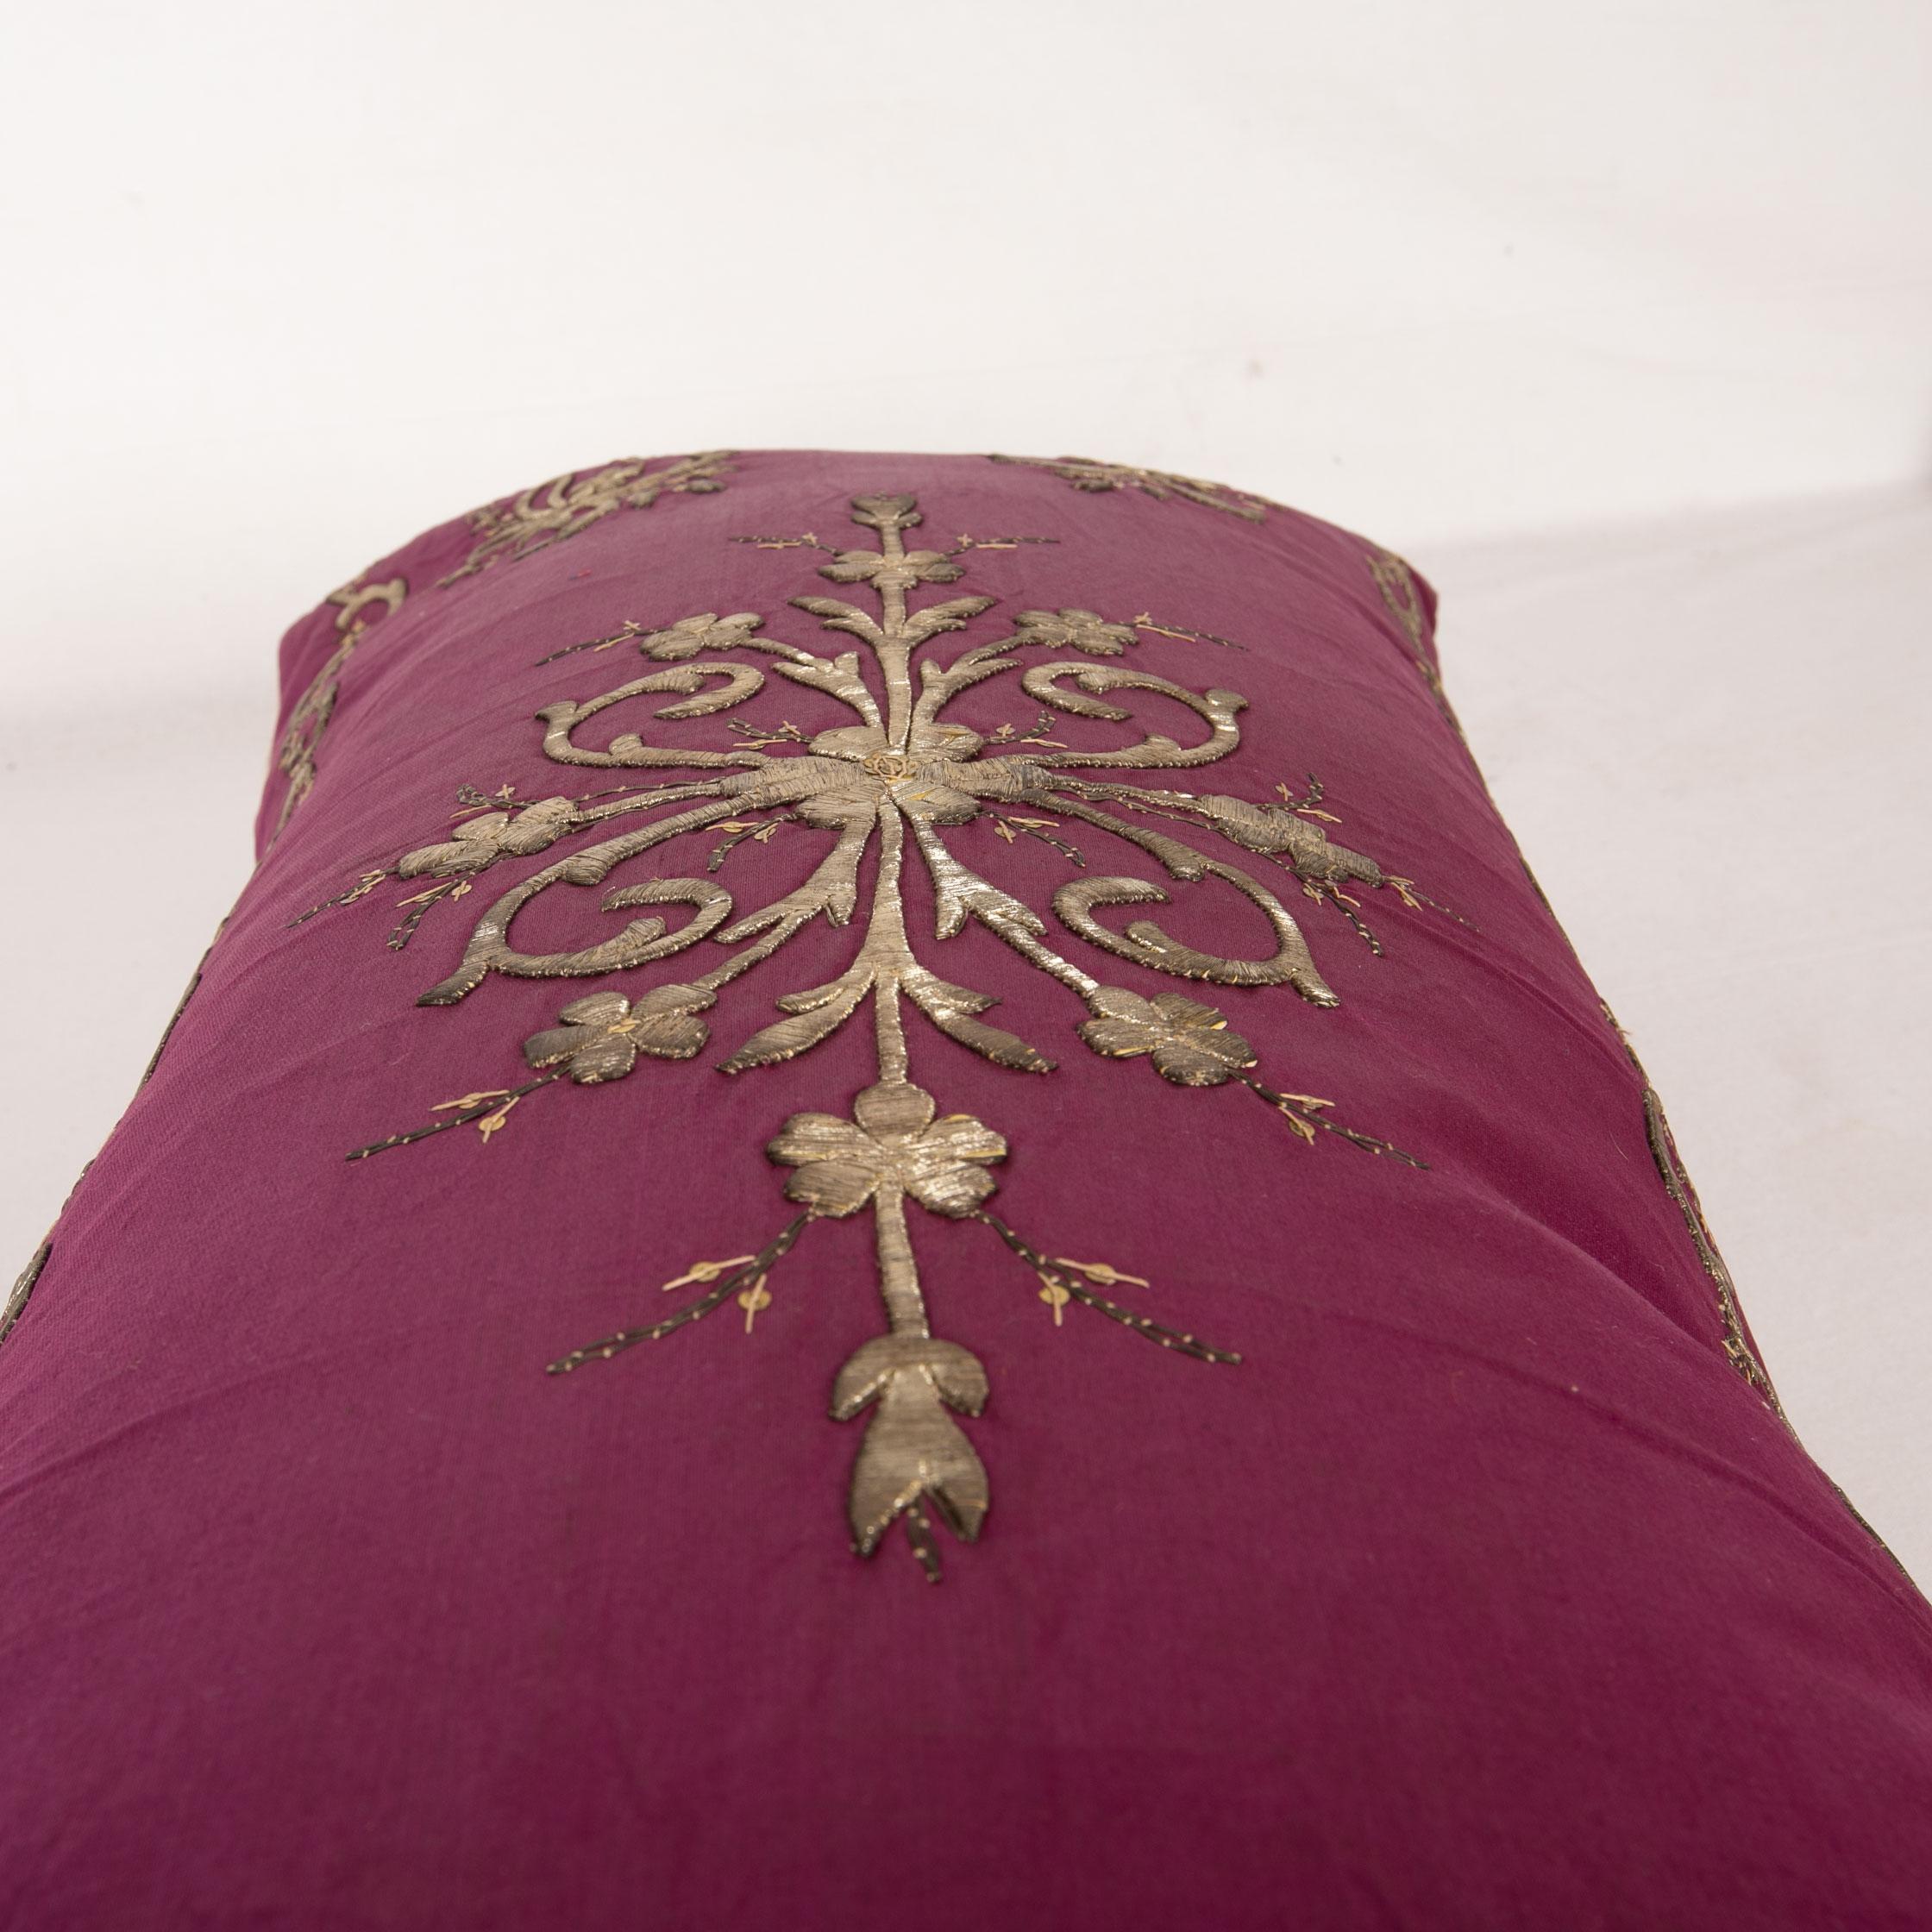 Embroidered Antique Ottoman Sarma Silk  Pillow Case, Late 19th-Early 20th Century